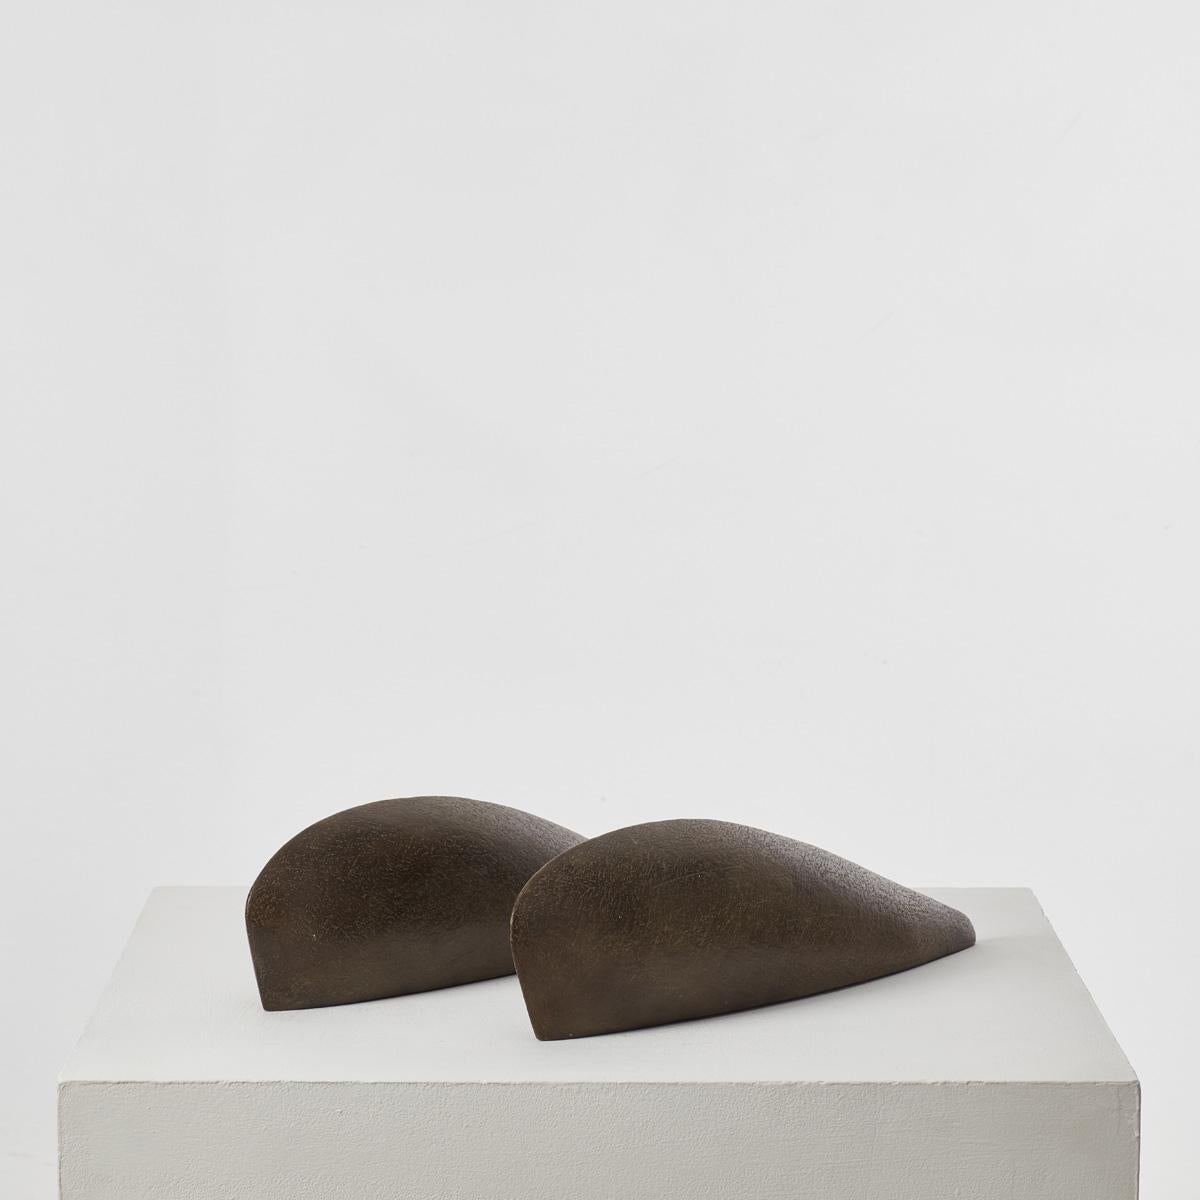 Modern Pair of Abstract Mound Sculptures from the Collection of Sir Terence Conran